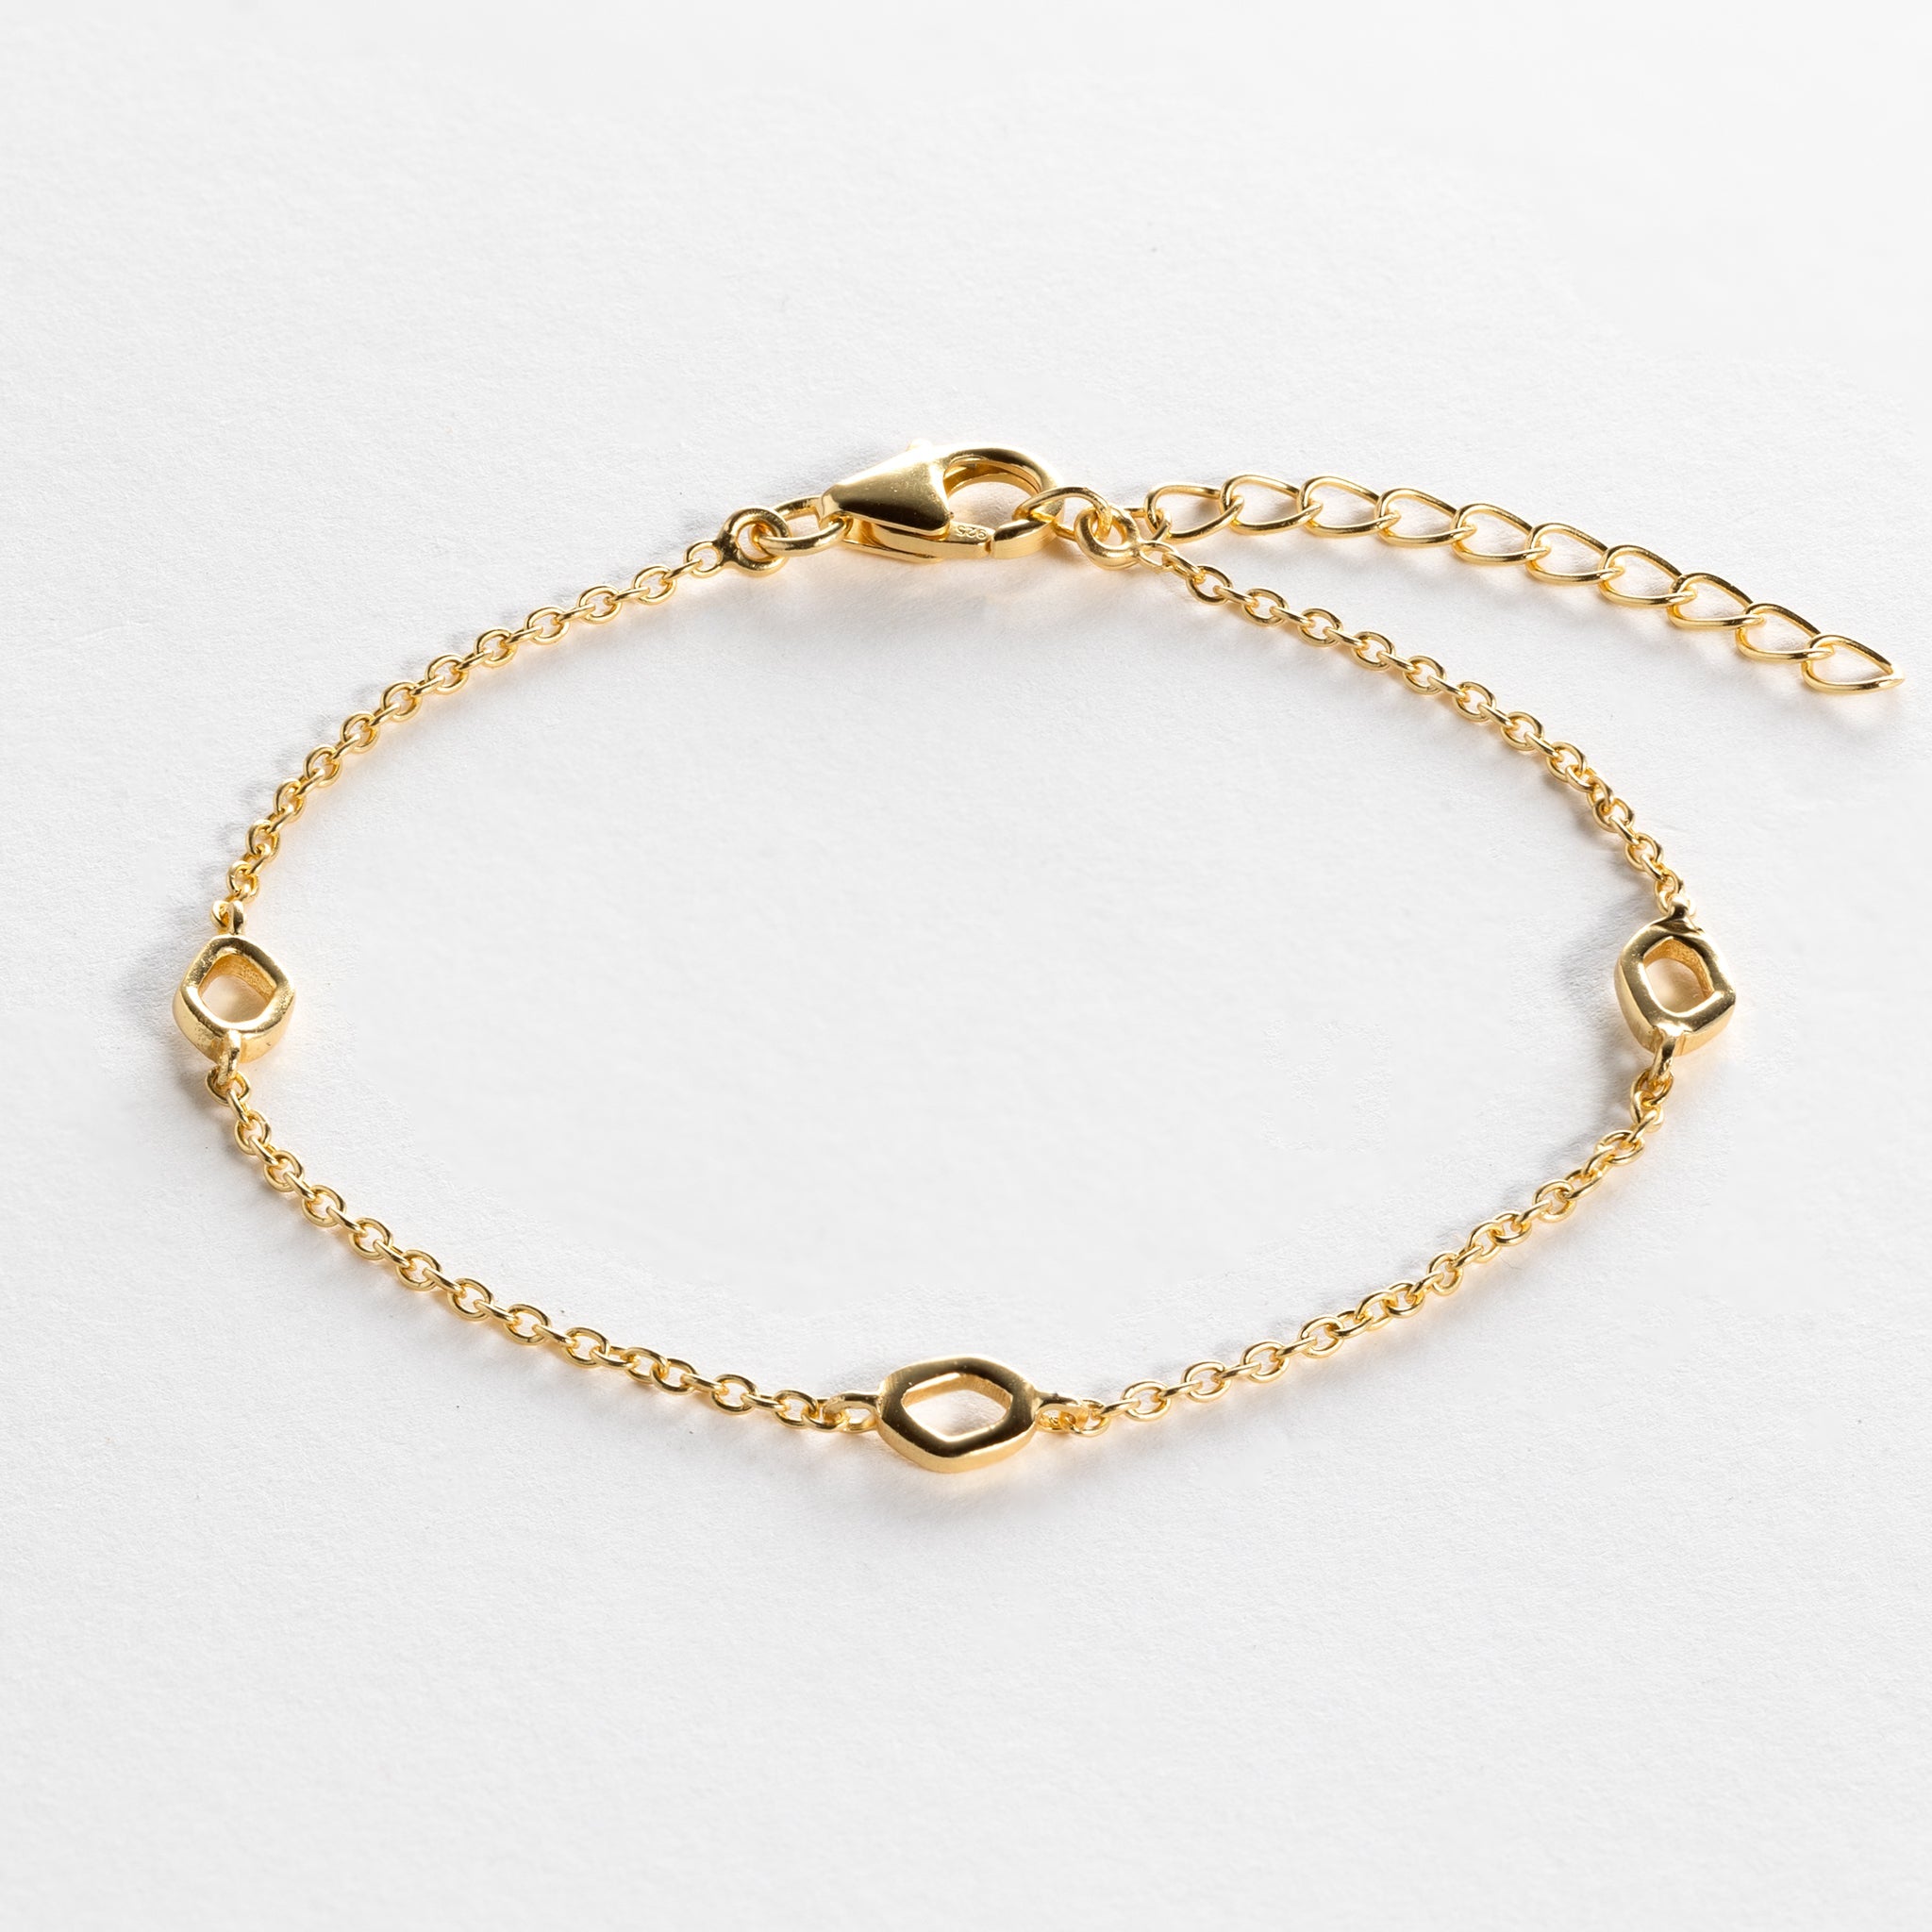 Bracelet features small dapple shapes and is crafted from sterling silver or 18ct gold vermeil.